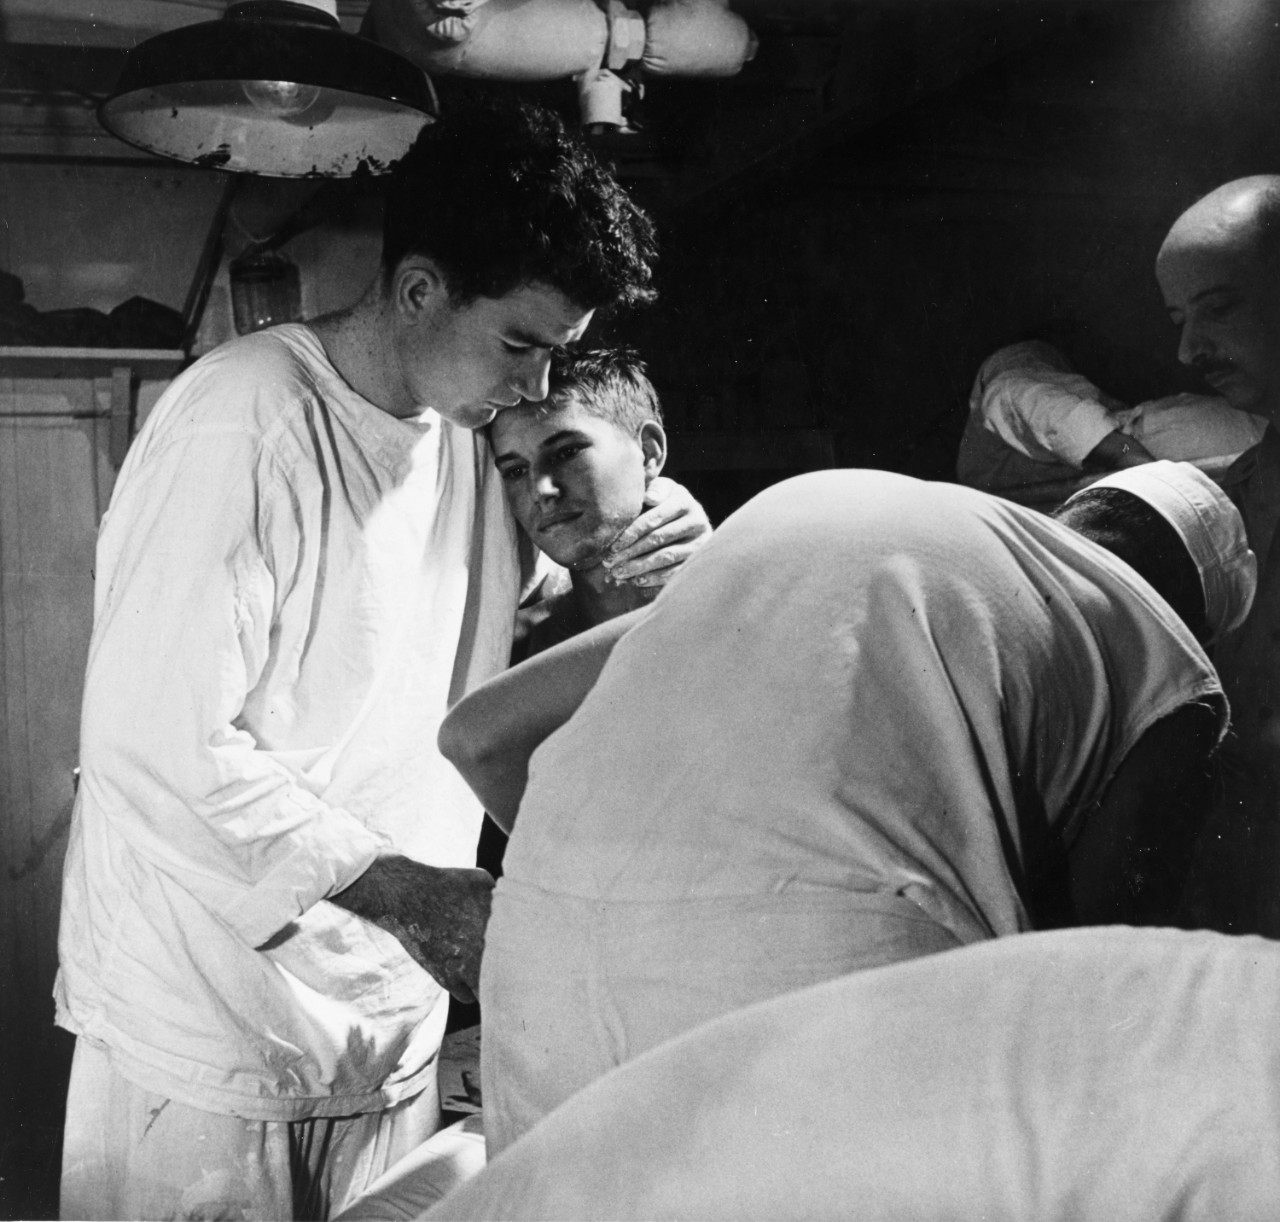 Army Private J.B. Slagle receives his daily dressing of wounds on board USS Solace (AH-5), while en route from Okinawa to Guam, May 1945. A corpsman comforts him during the painful process. Photographed by Lieutenant Victor Jorgenson, USNR.